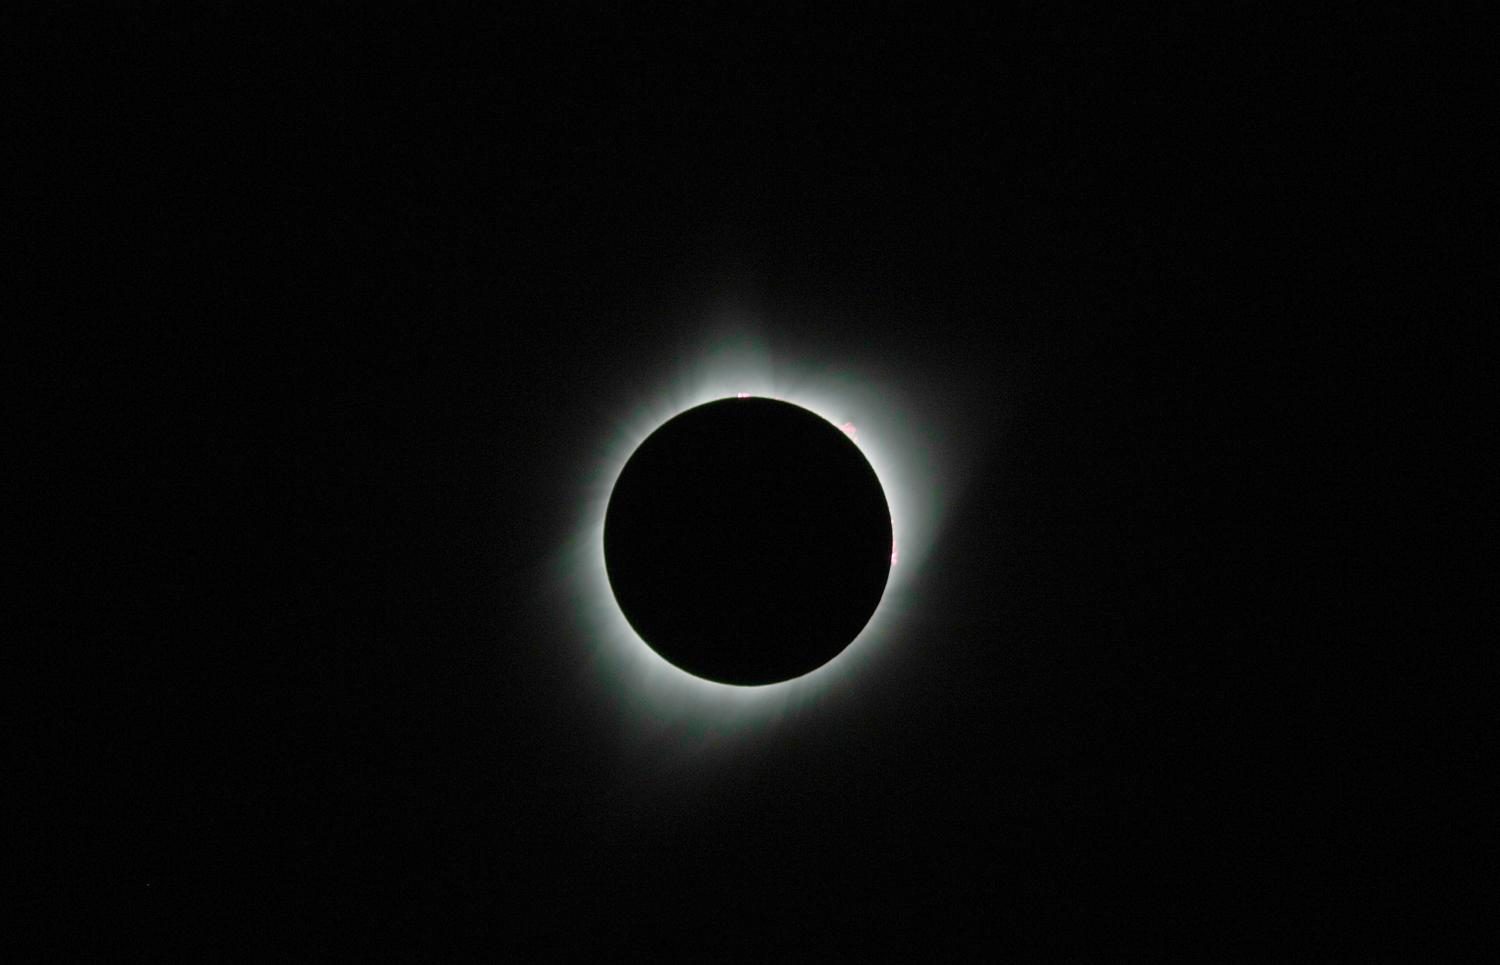 A picture showing an image of the eclipse that occured on Aug. 21 by Bakersfield College astronomy professor, Nick Strobel.